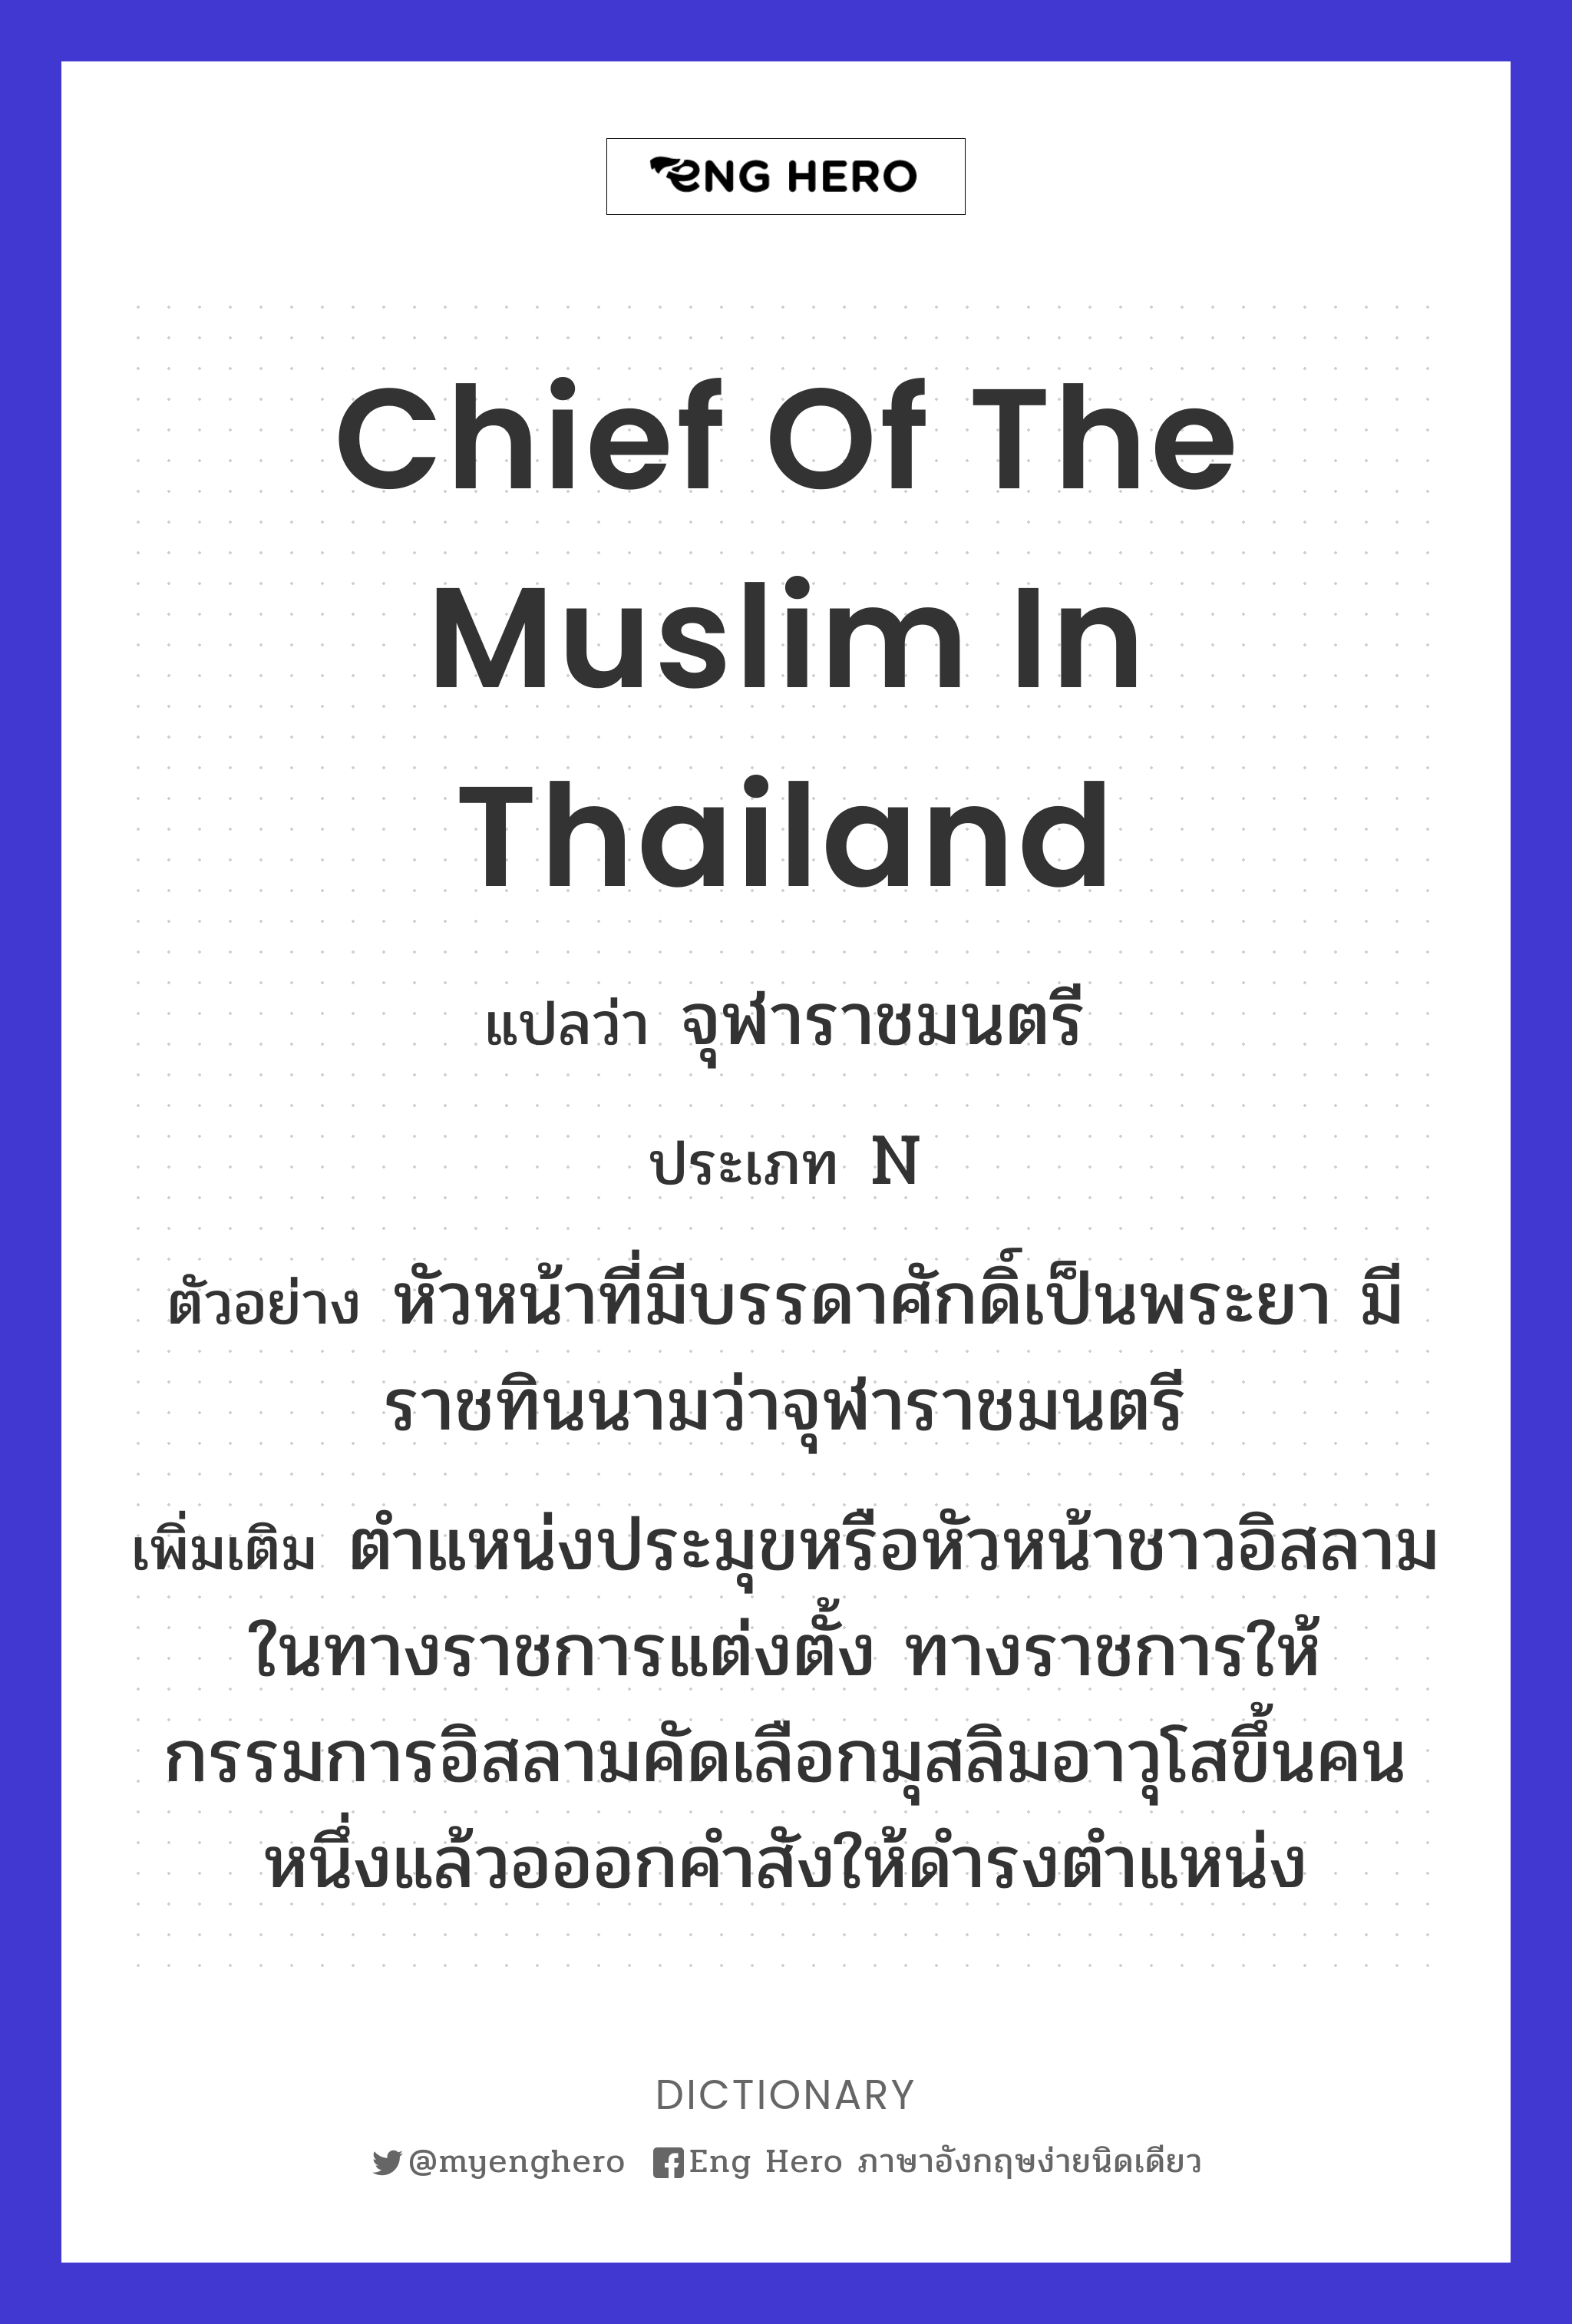 chief of the Muslim in Thailand